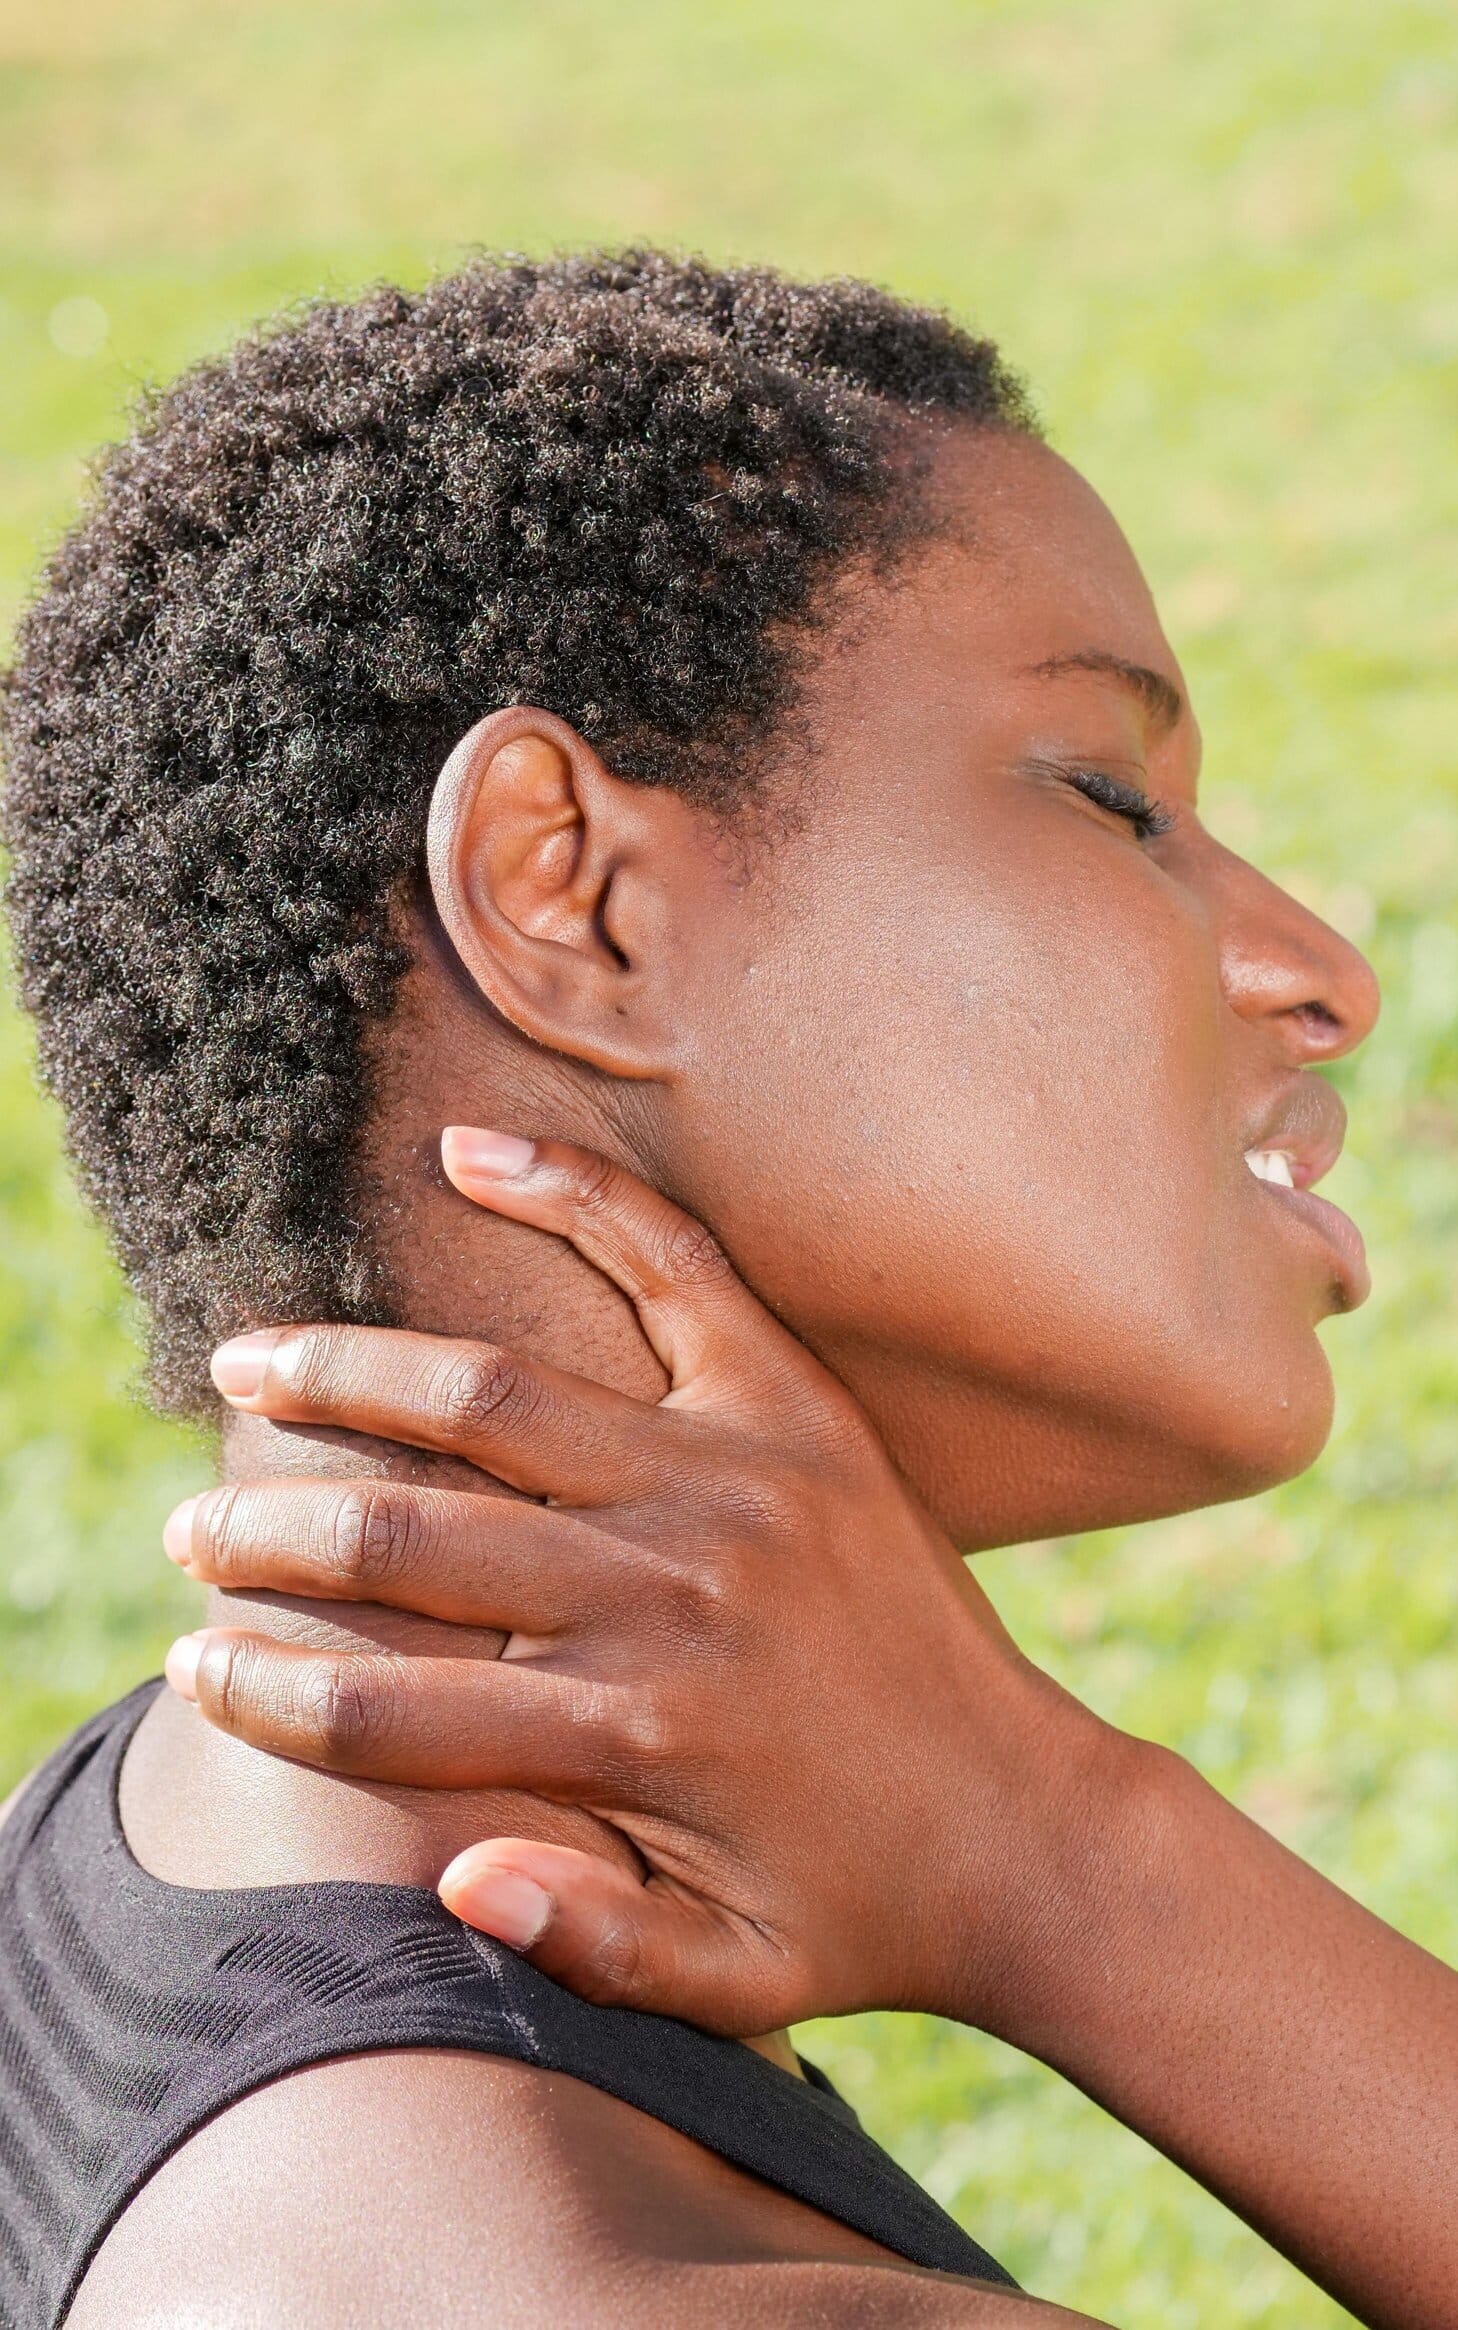 Lady holding her neck, her face indicates she is in pain. She is thinking about personal injury counselling